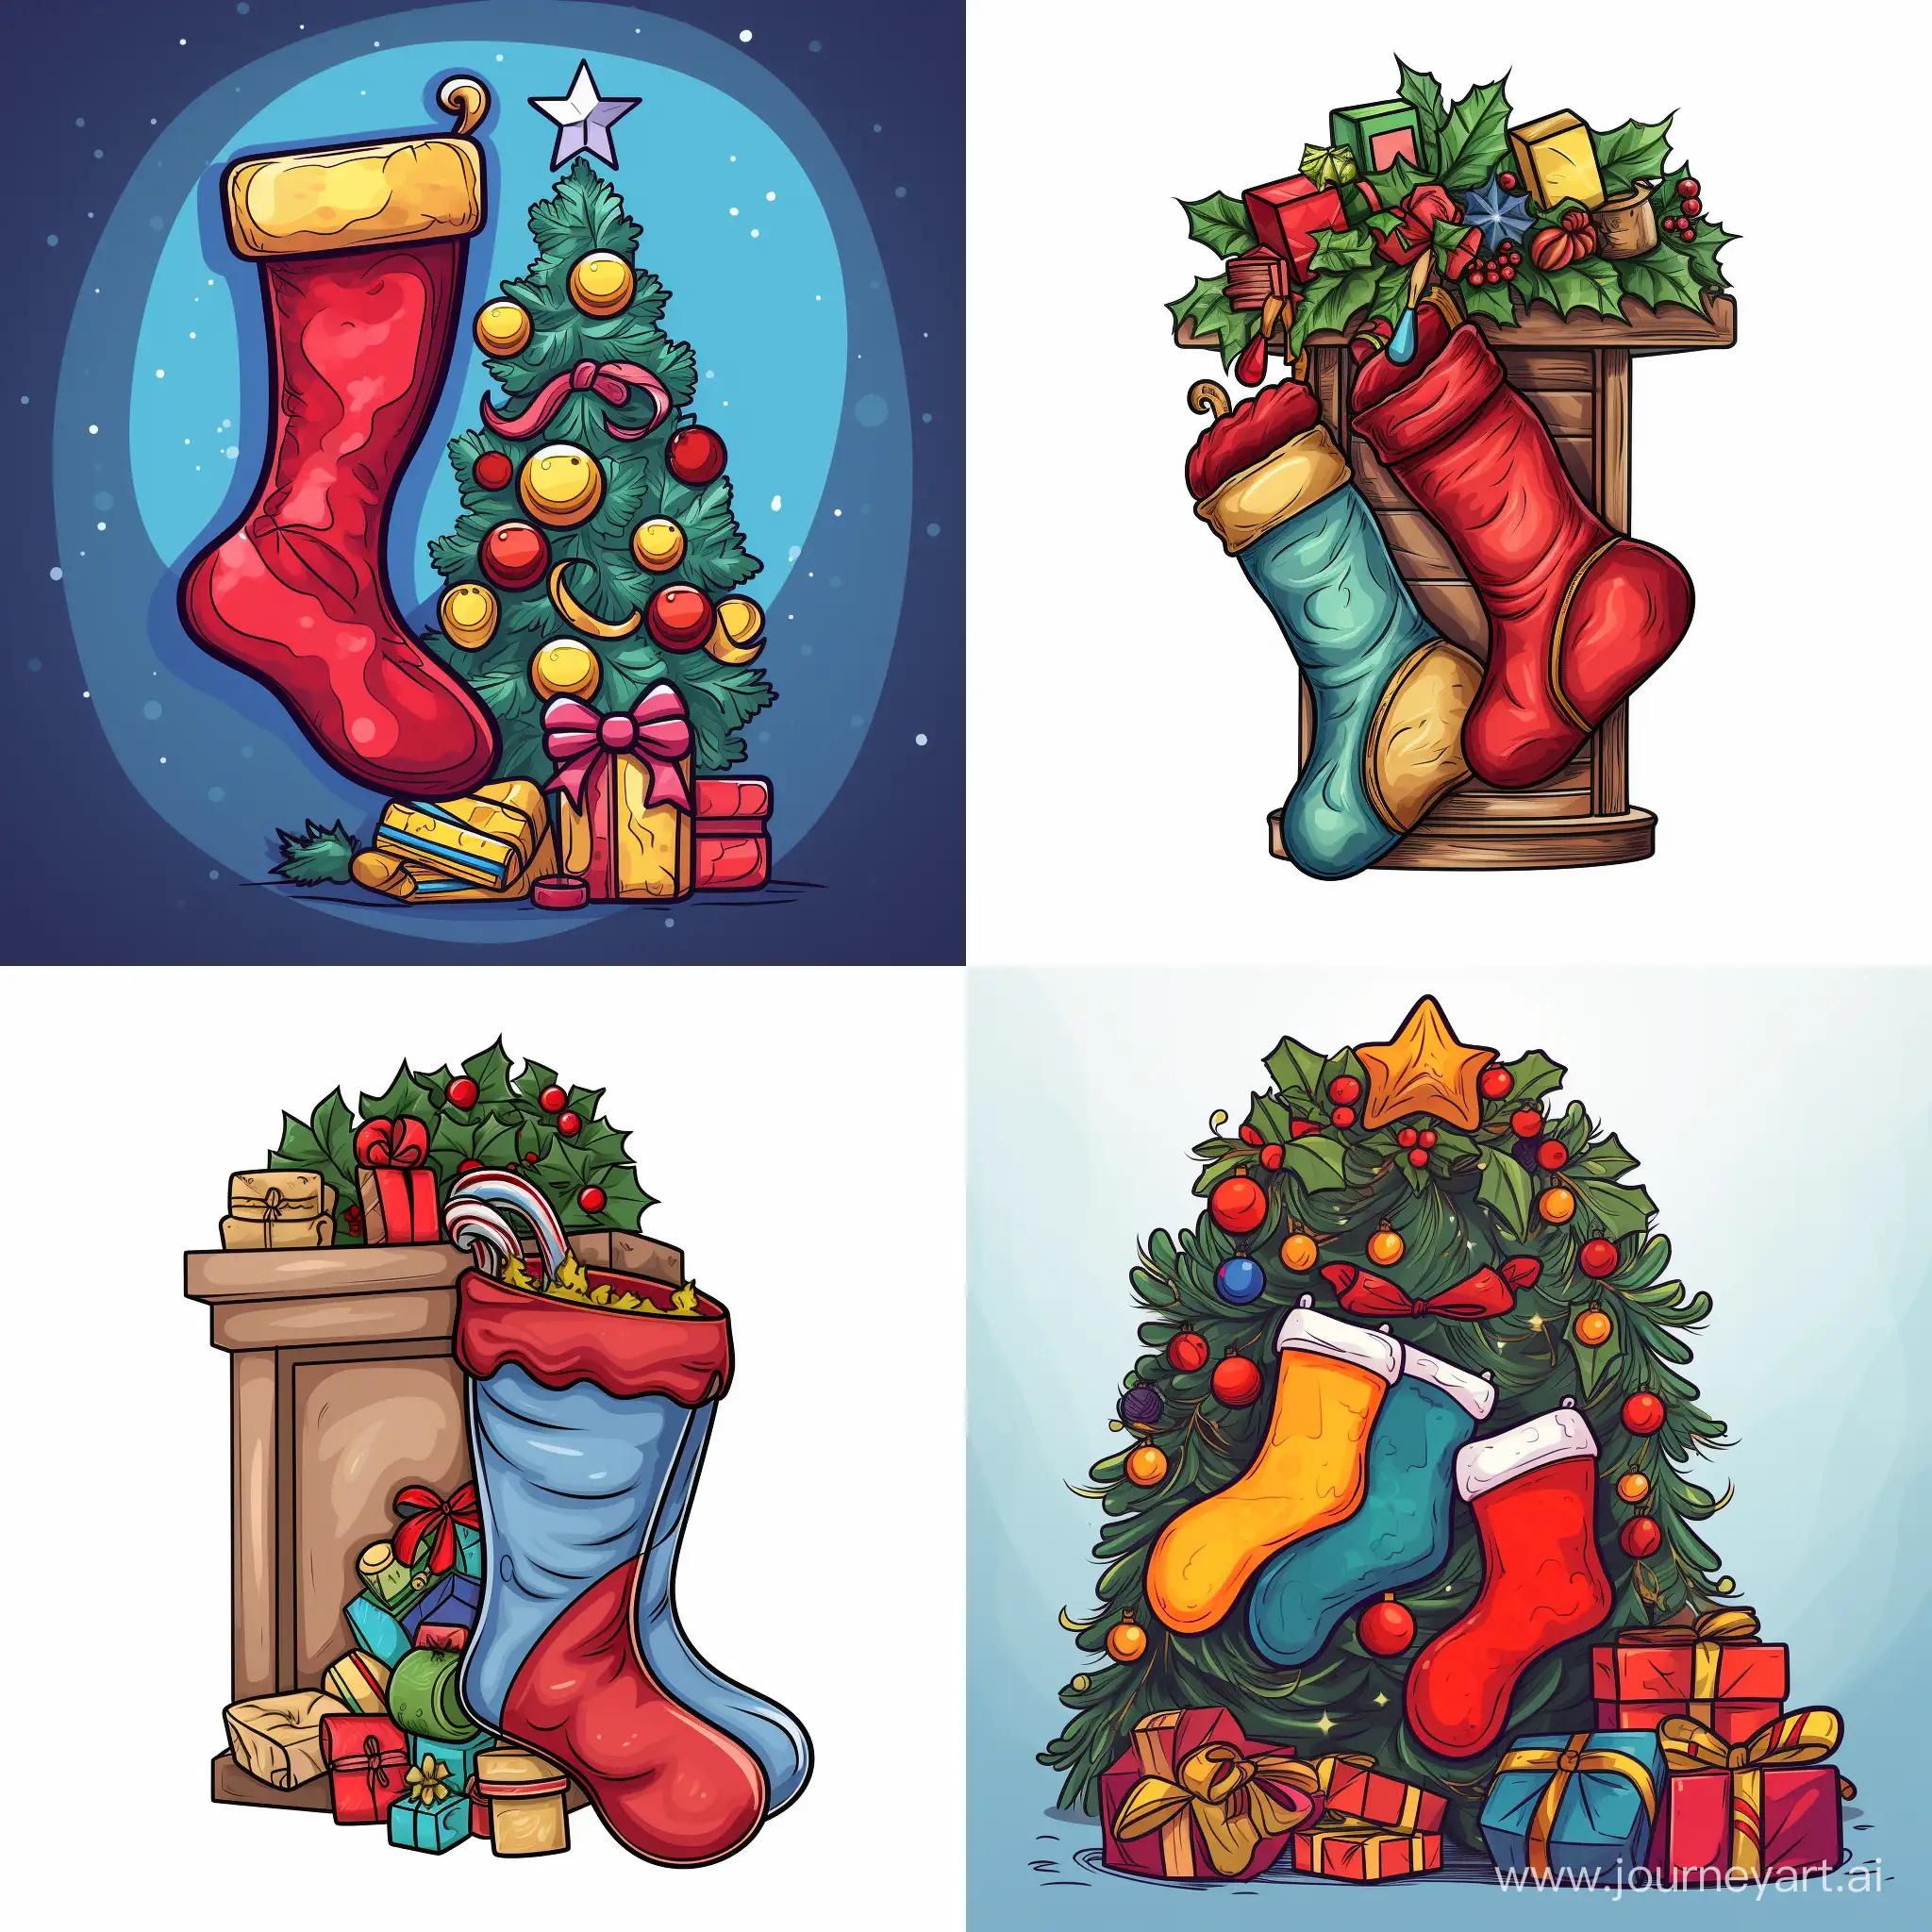 Festive-Cartoon-Christmas-Stocking-Overflowing-with-Delightful-Gifts